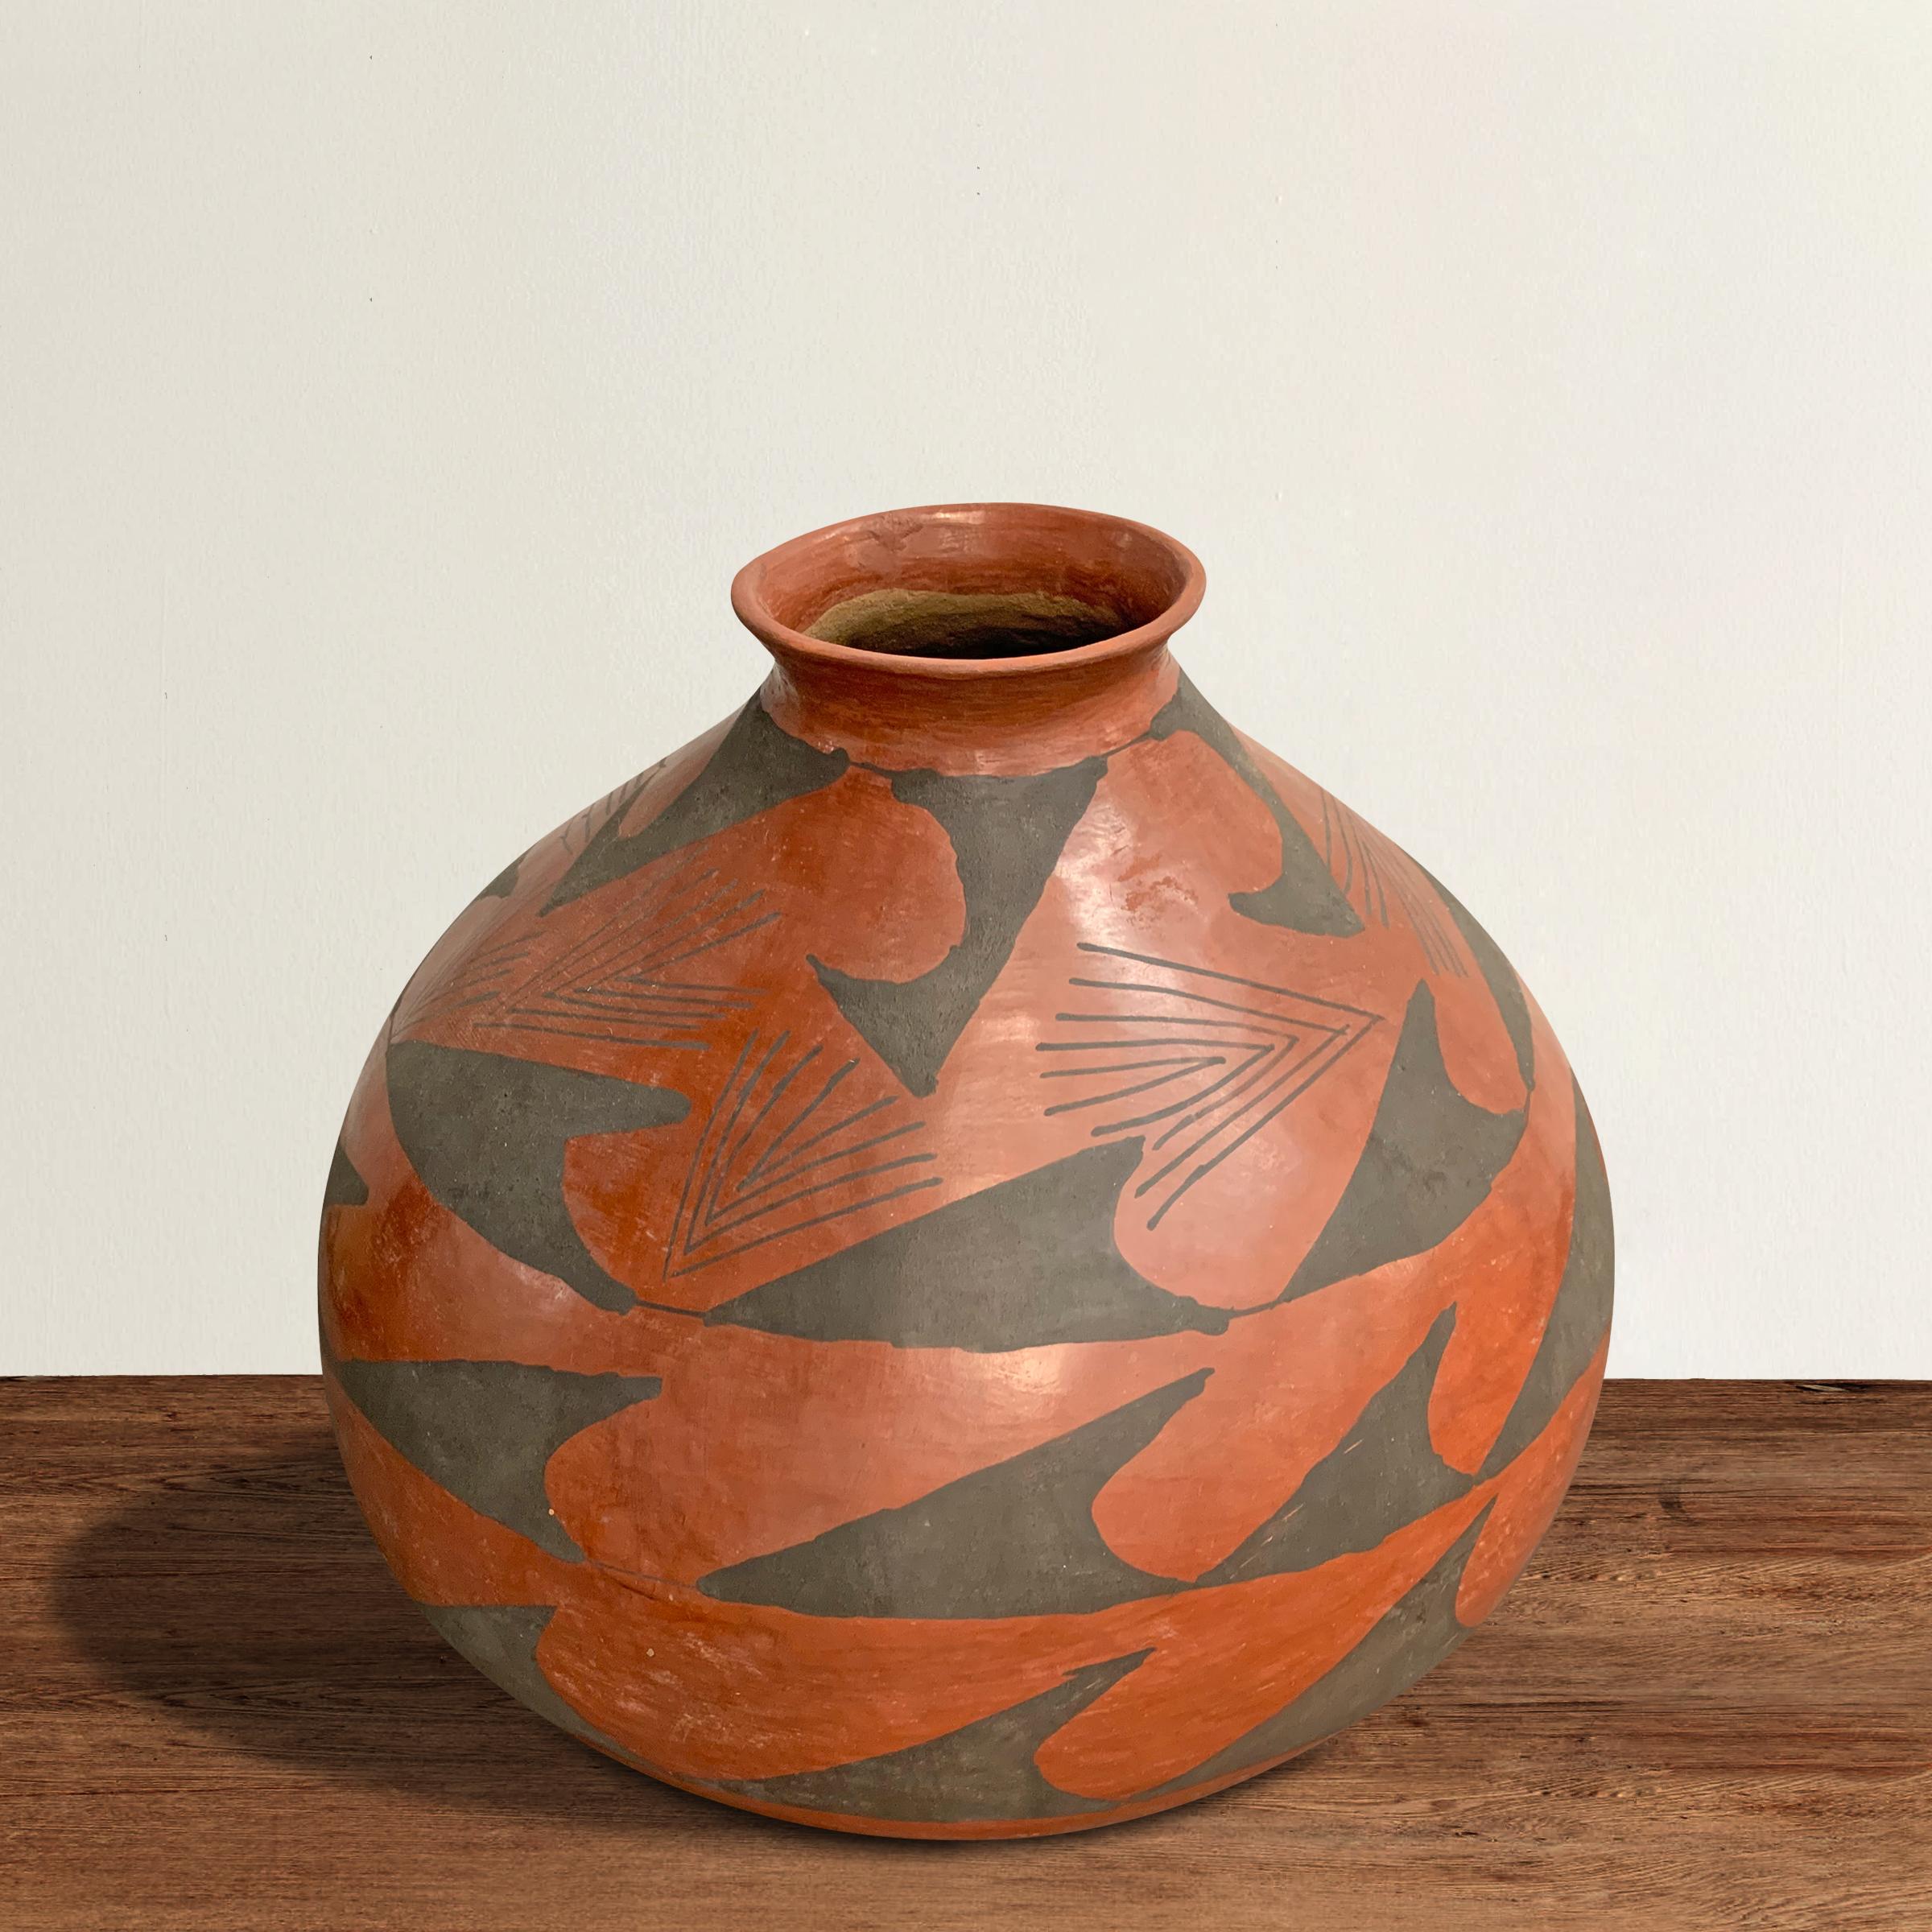 A striking vintage native American pueblo pottery vase with a narrow neck and a wide belly, and decorated with an all-over geometric pattern and a stylized pine needle pattern around the top portion of the vase. Not signed.